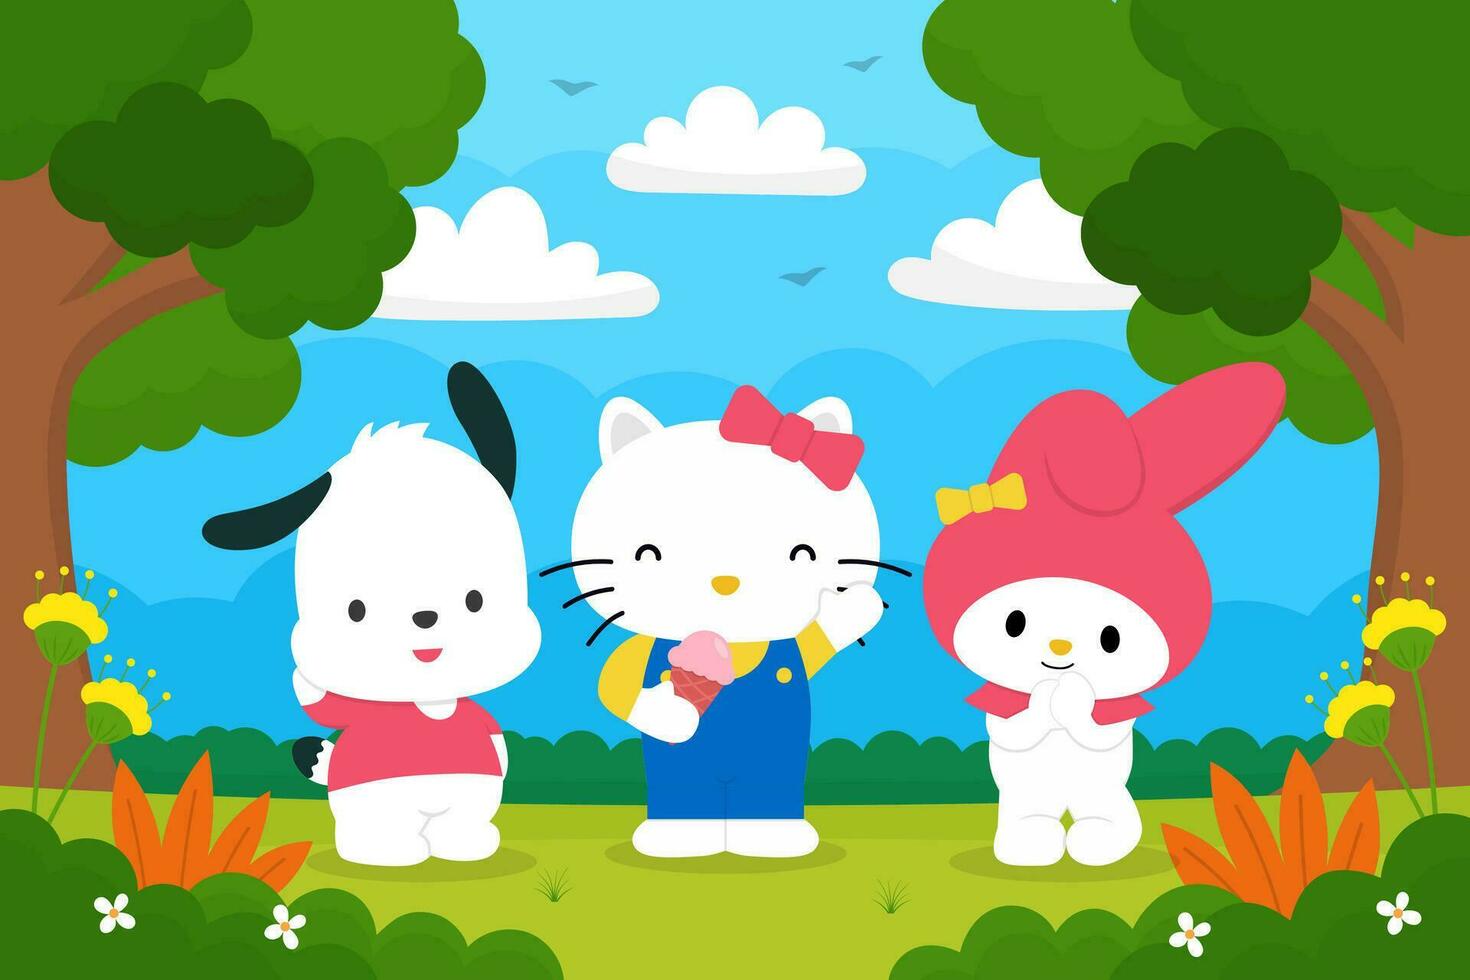 Cute Animal Standing Together in the Park vector